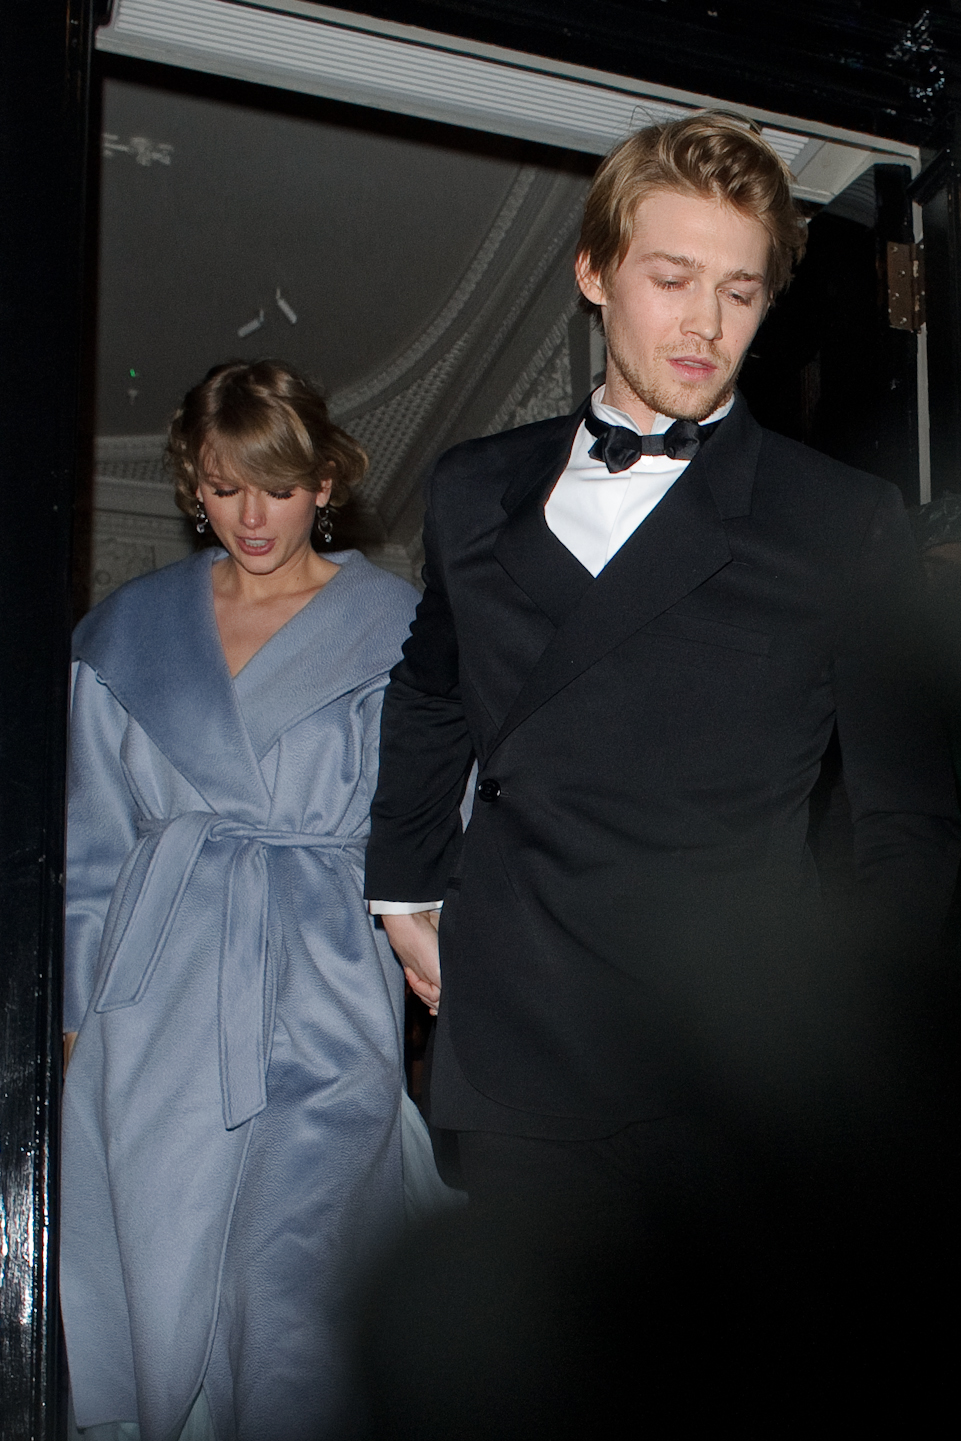 Taylor Swift and Joe Alwyn seen attending the Vogue BAFTA party at Annabel's club in Mayfair on February 10, 2019 in London, England. (Photo by GOR/GC Images) (GOR—GC Images)